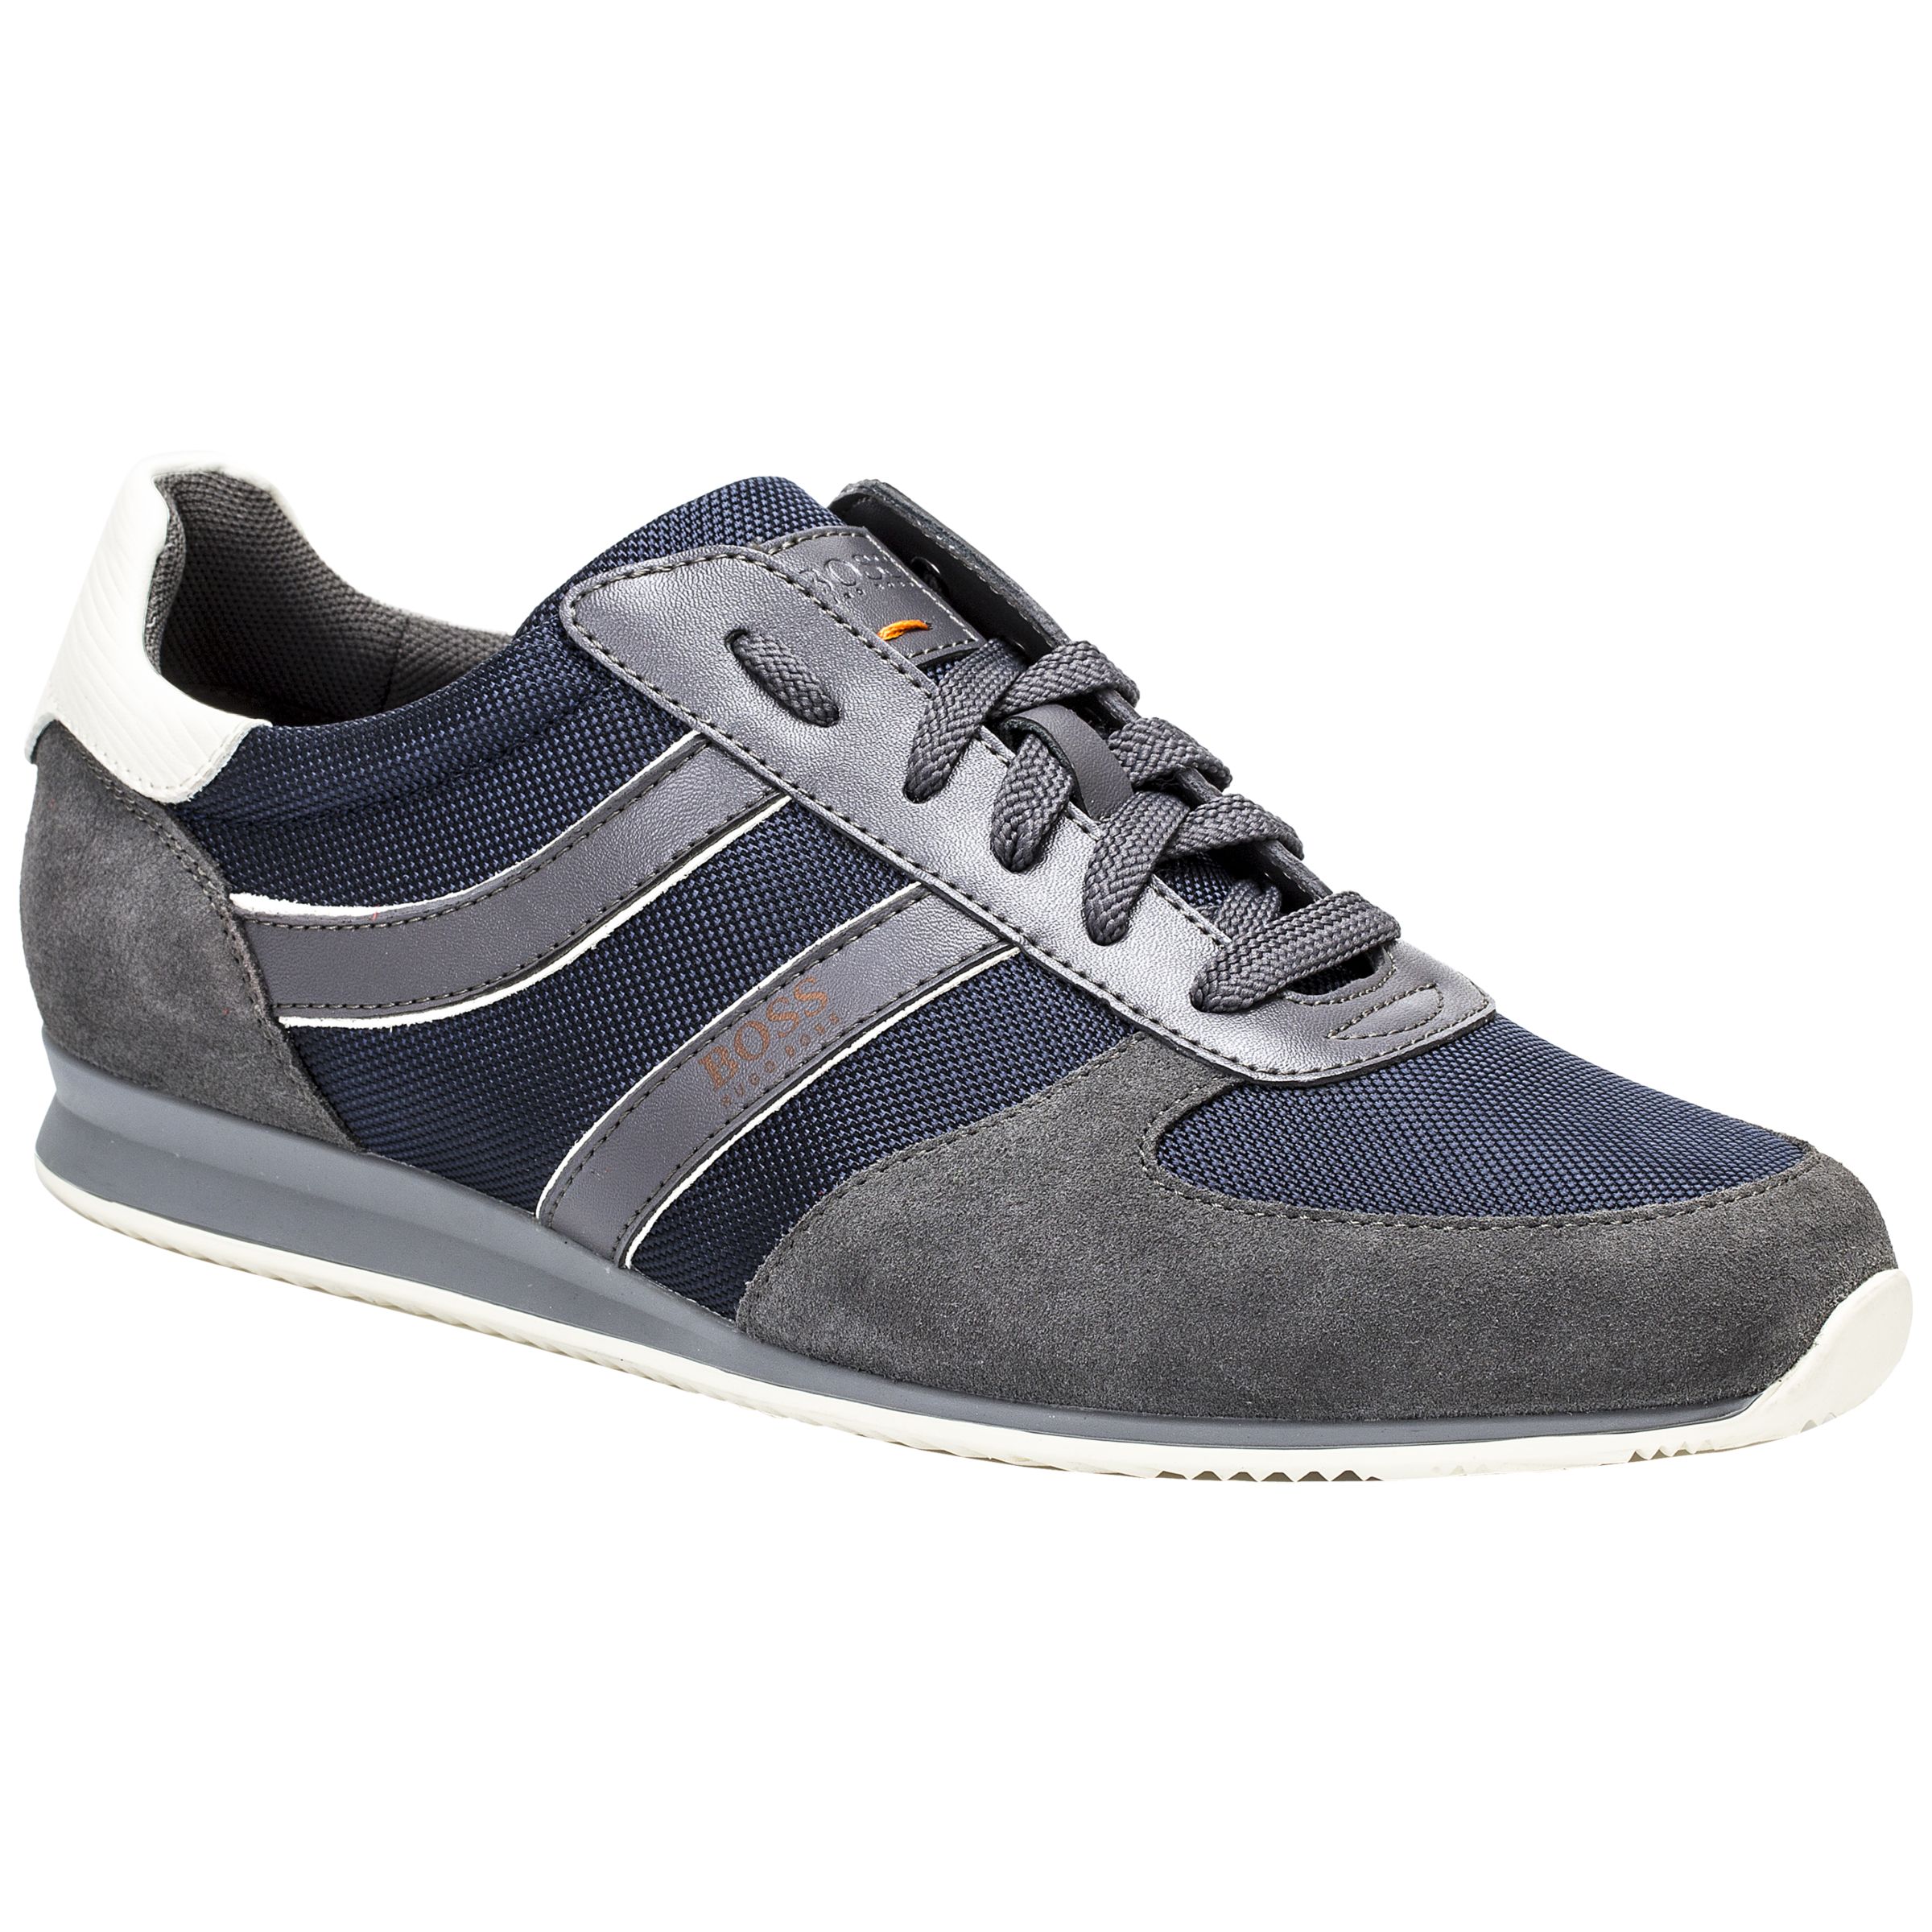 HUGO BOSS MEN'S ORLAND LOWP SDNY2 TRAINERS IN NAVY BLUE 